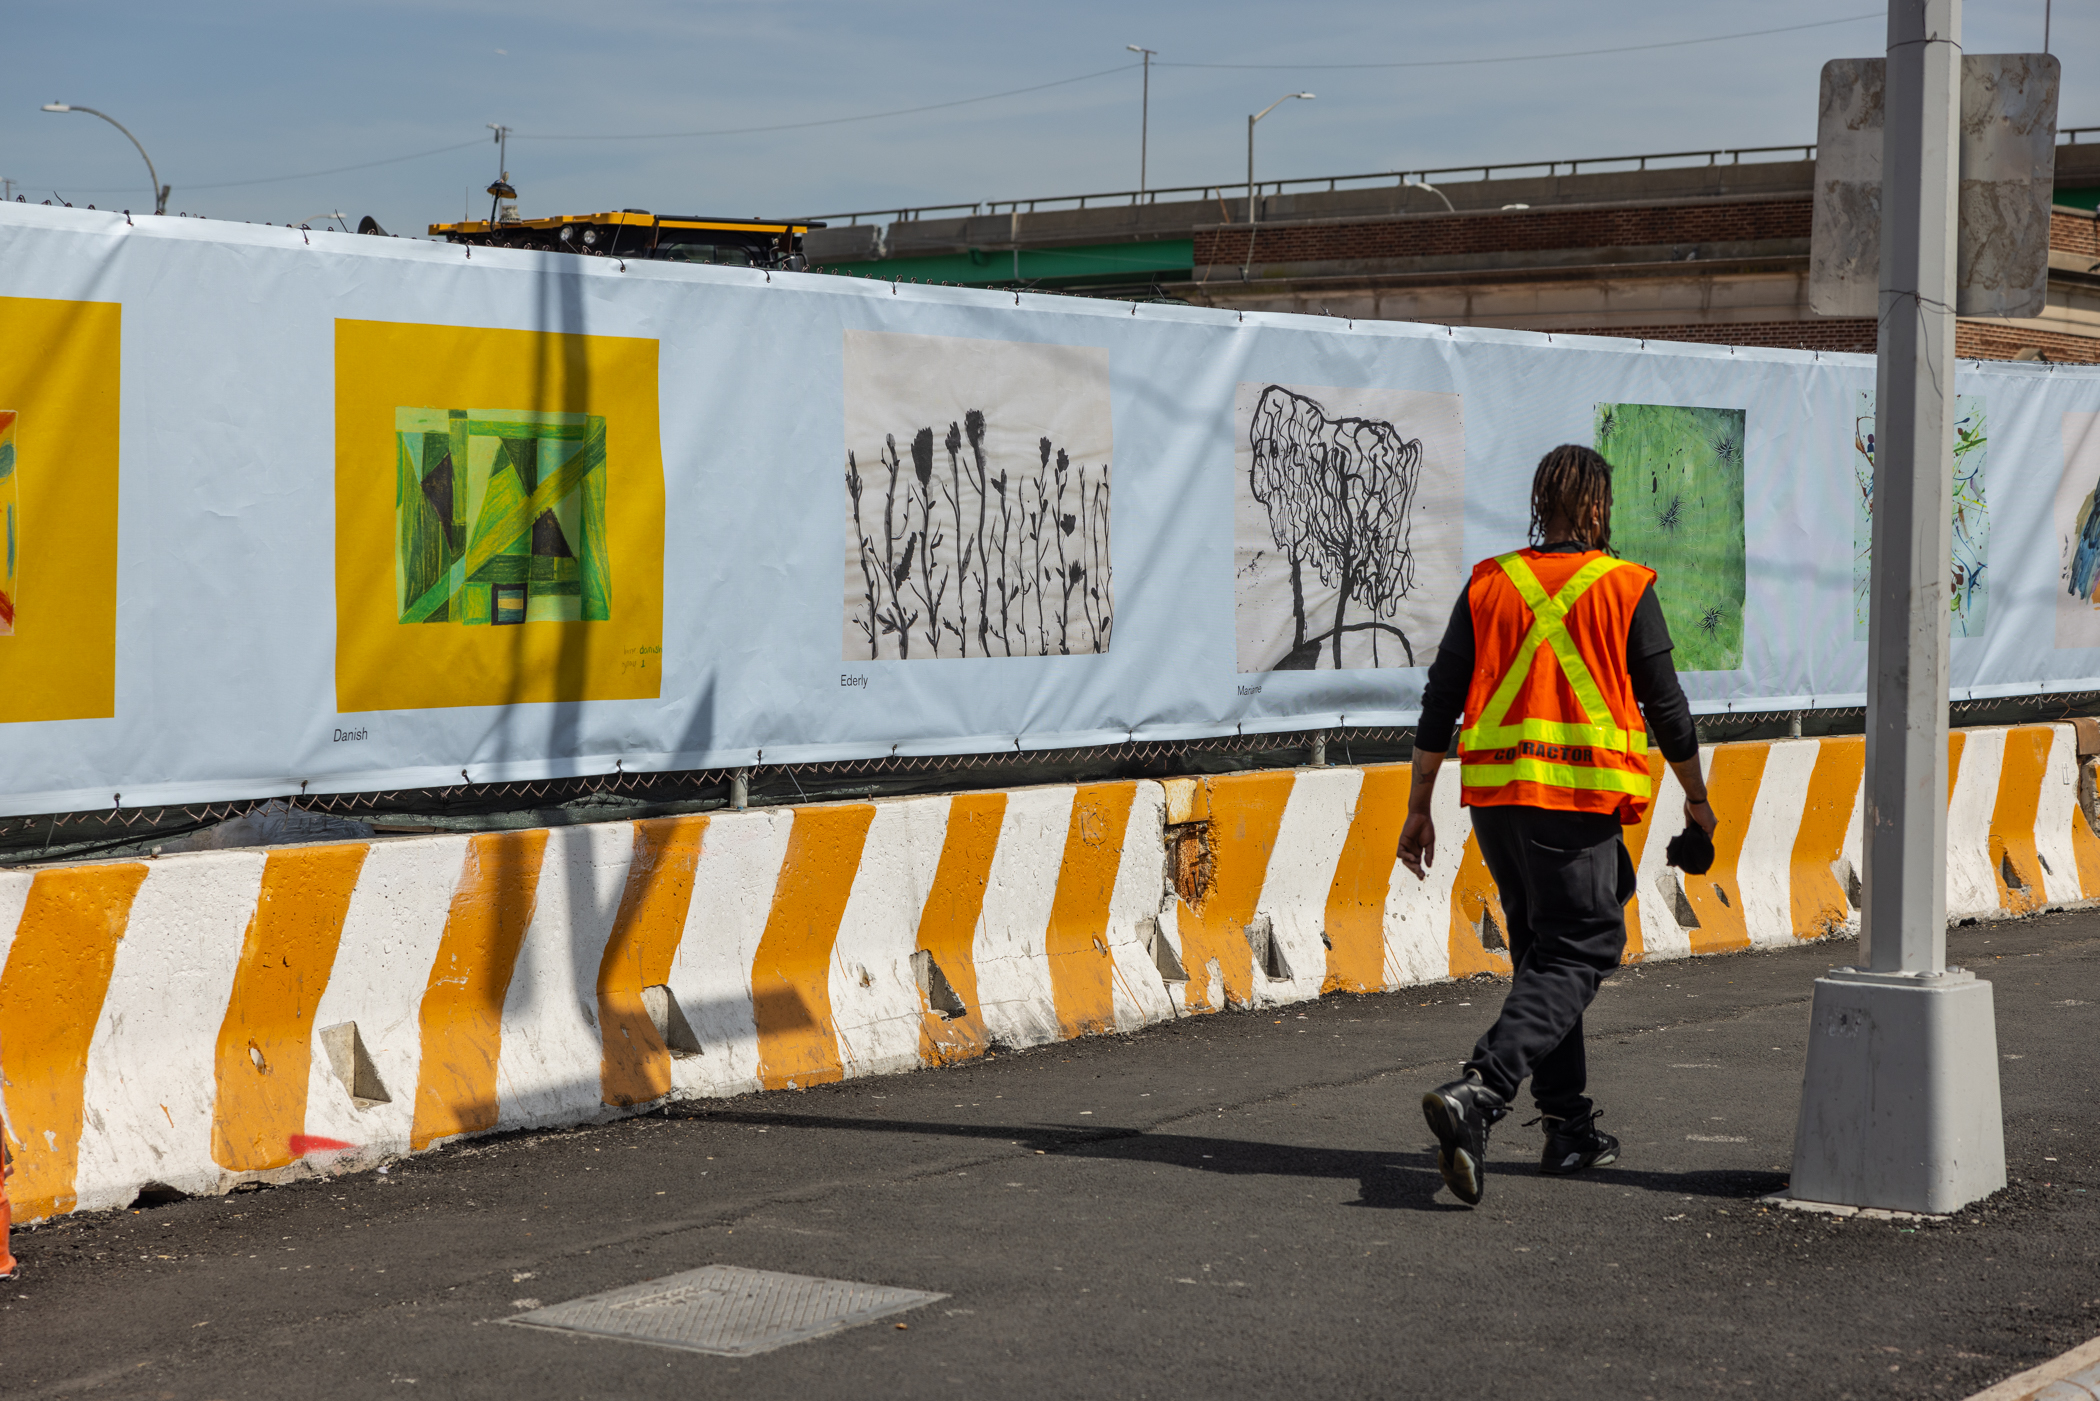 pedestrian walks by fencing with artwork on it